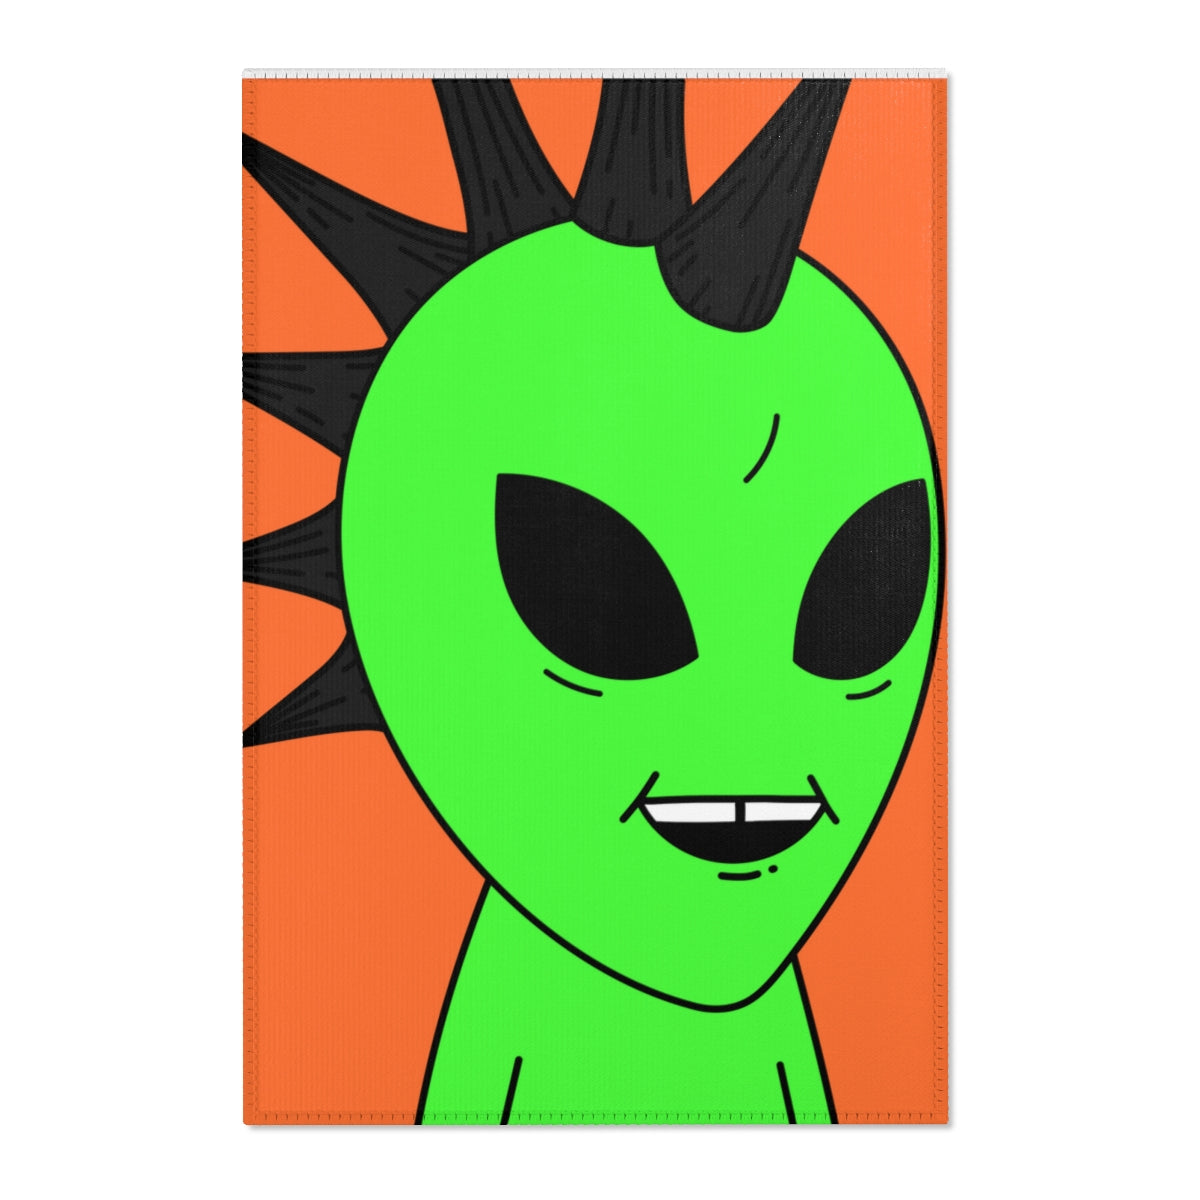 Black Hair Spiked Visitor Alien Area Rugs - Visitor751